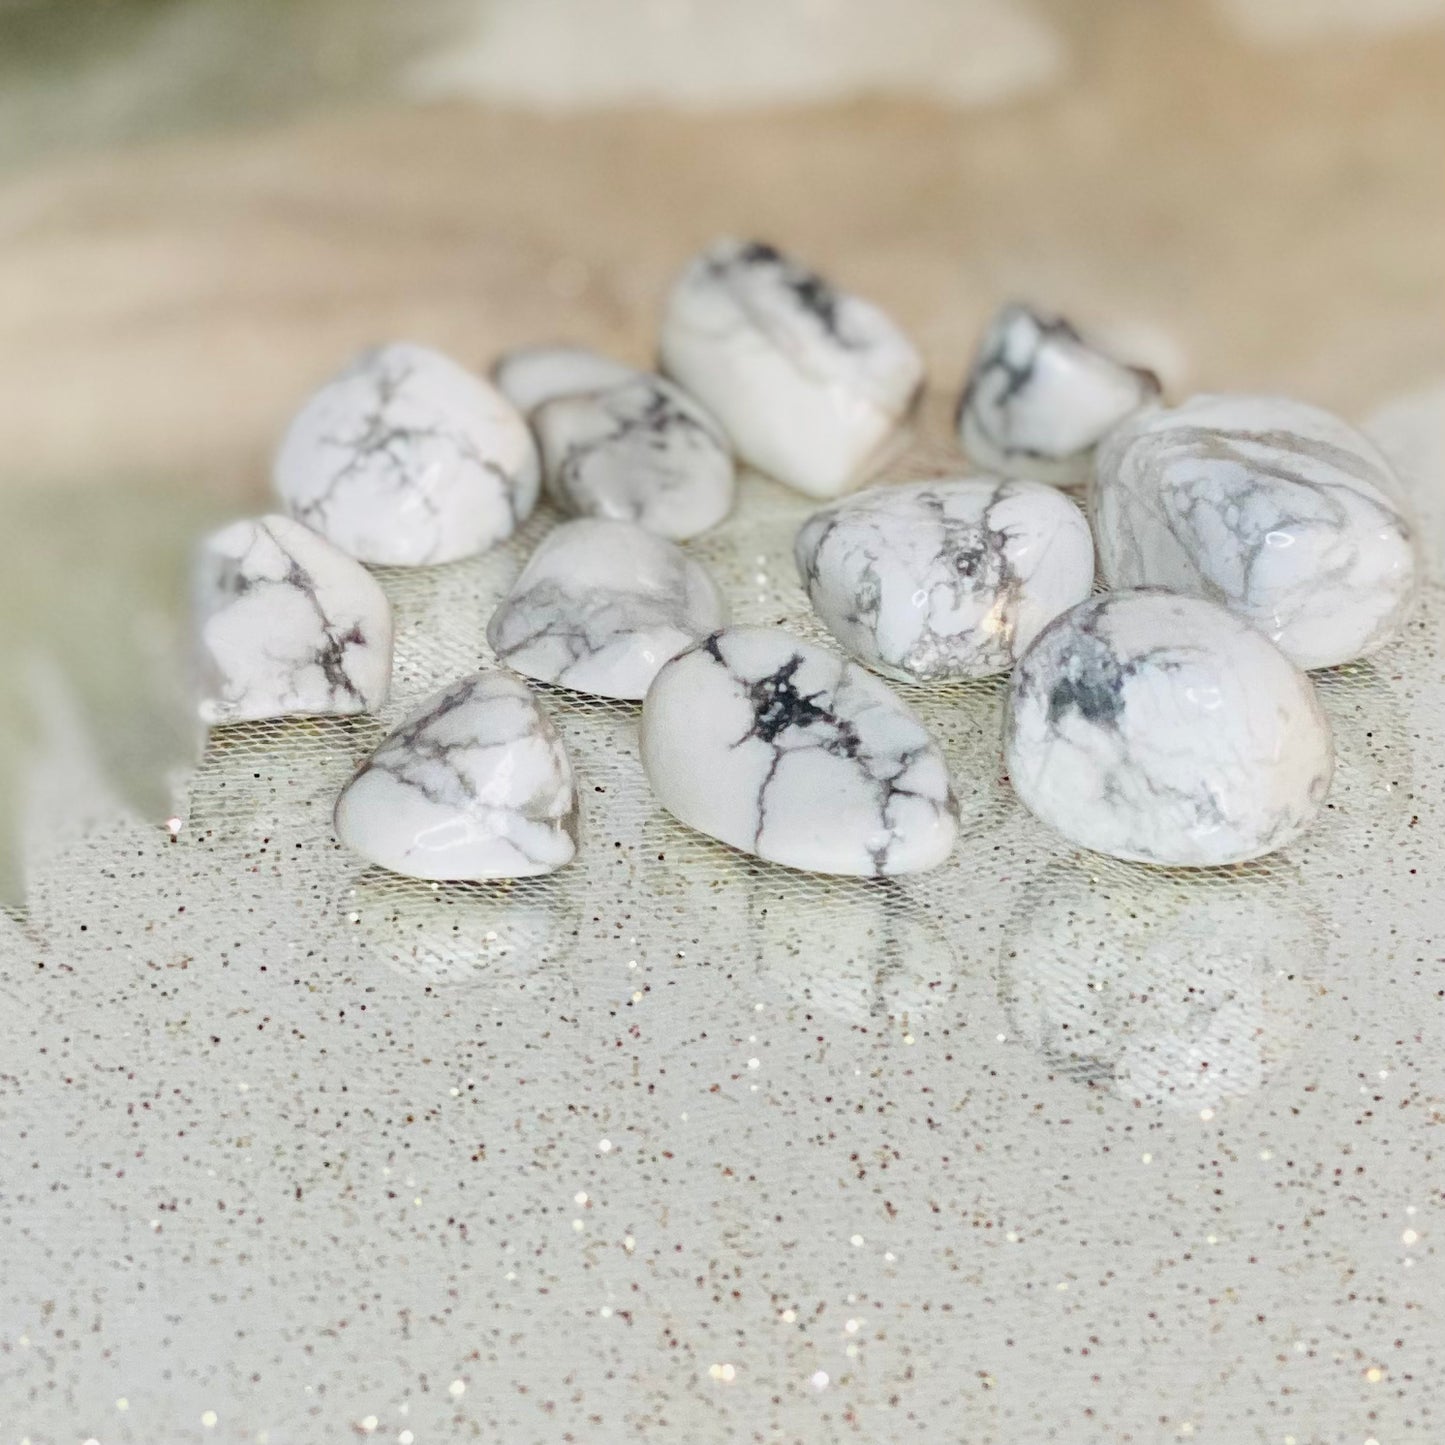 Soothing White Howlite Tumbled Stone for Inner Peace and Harmony